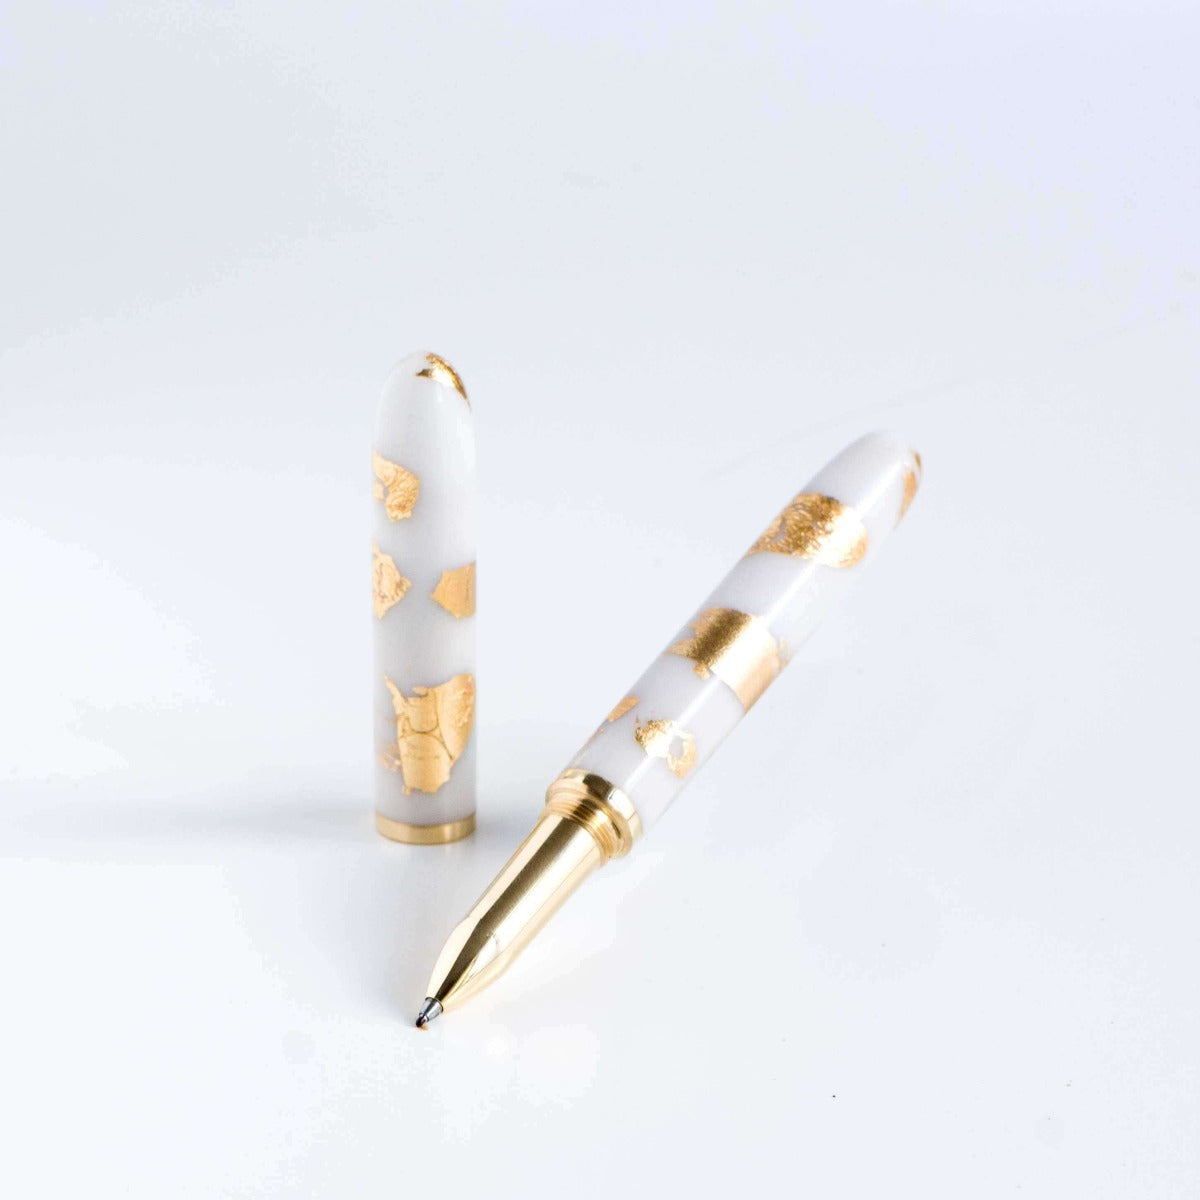 24ct Gold Leaf - Studio Pen fitted with a roller ball